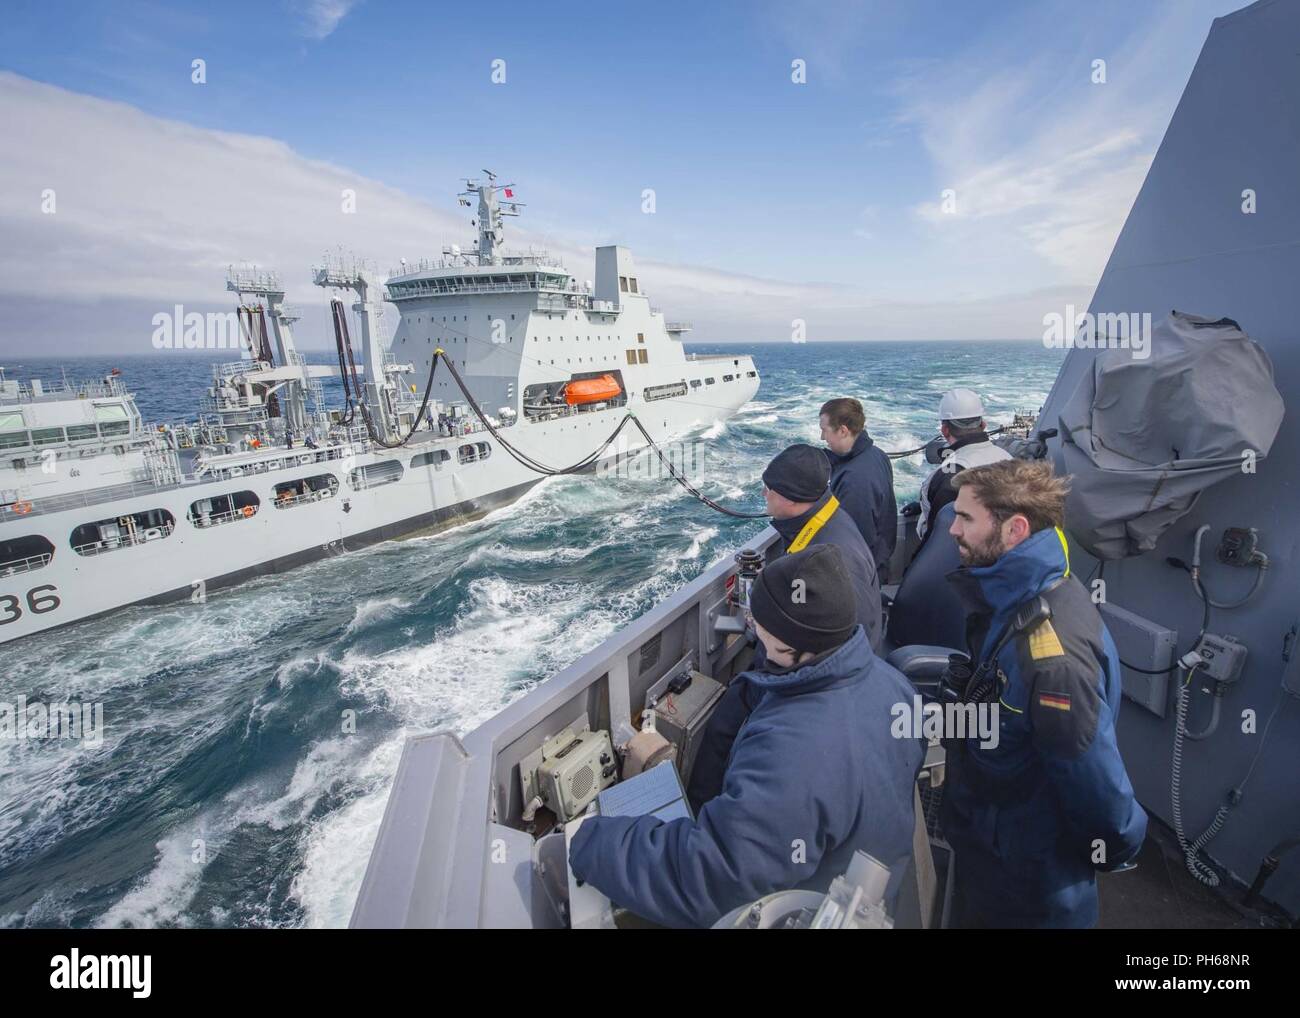 NORWEGIAN SEA (June 26, 2018) Sailors aboard the guided-missile destroyer USS Farragut (DDG 99) observe fuel being transferred to the ship during an underway replenishment with the British Royal Fleet Auxiliary replenishment tanker RFA Tidespring (A136). Farragut is currently deployed as part of the Harry S. Truman Carrier Strike Group. With USS Harry S. Truman (CVN 75) as the flagship, deployed strike group units include staffs, ships and aircraft of Carrier Strike Group Eight (CSG 8), Destroyer Squadron Two Eight (DESRON 28) and Carrier Air Wing One (CVW-1); as well as Sachsen-class German F Stock Photo